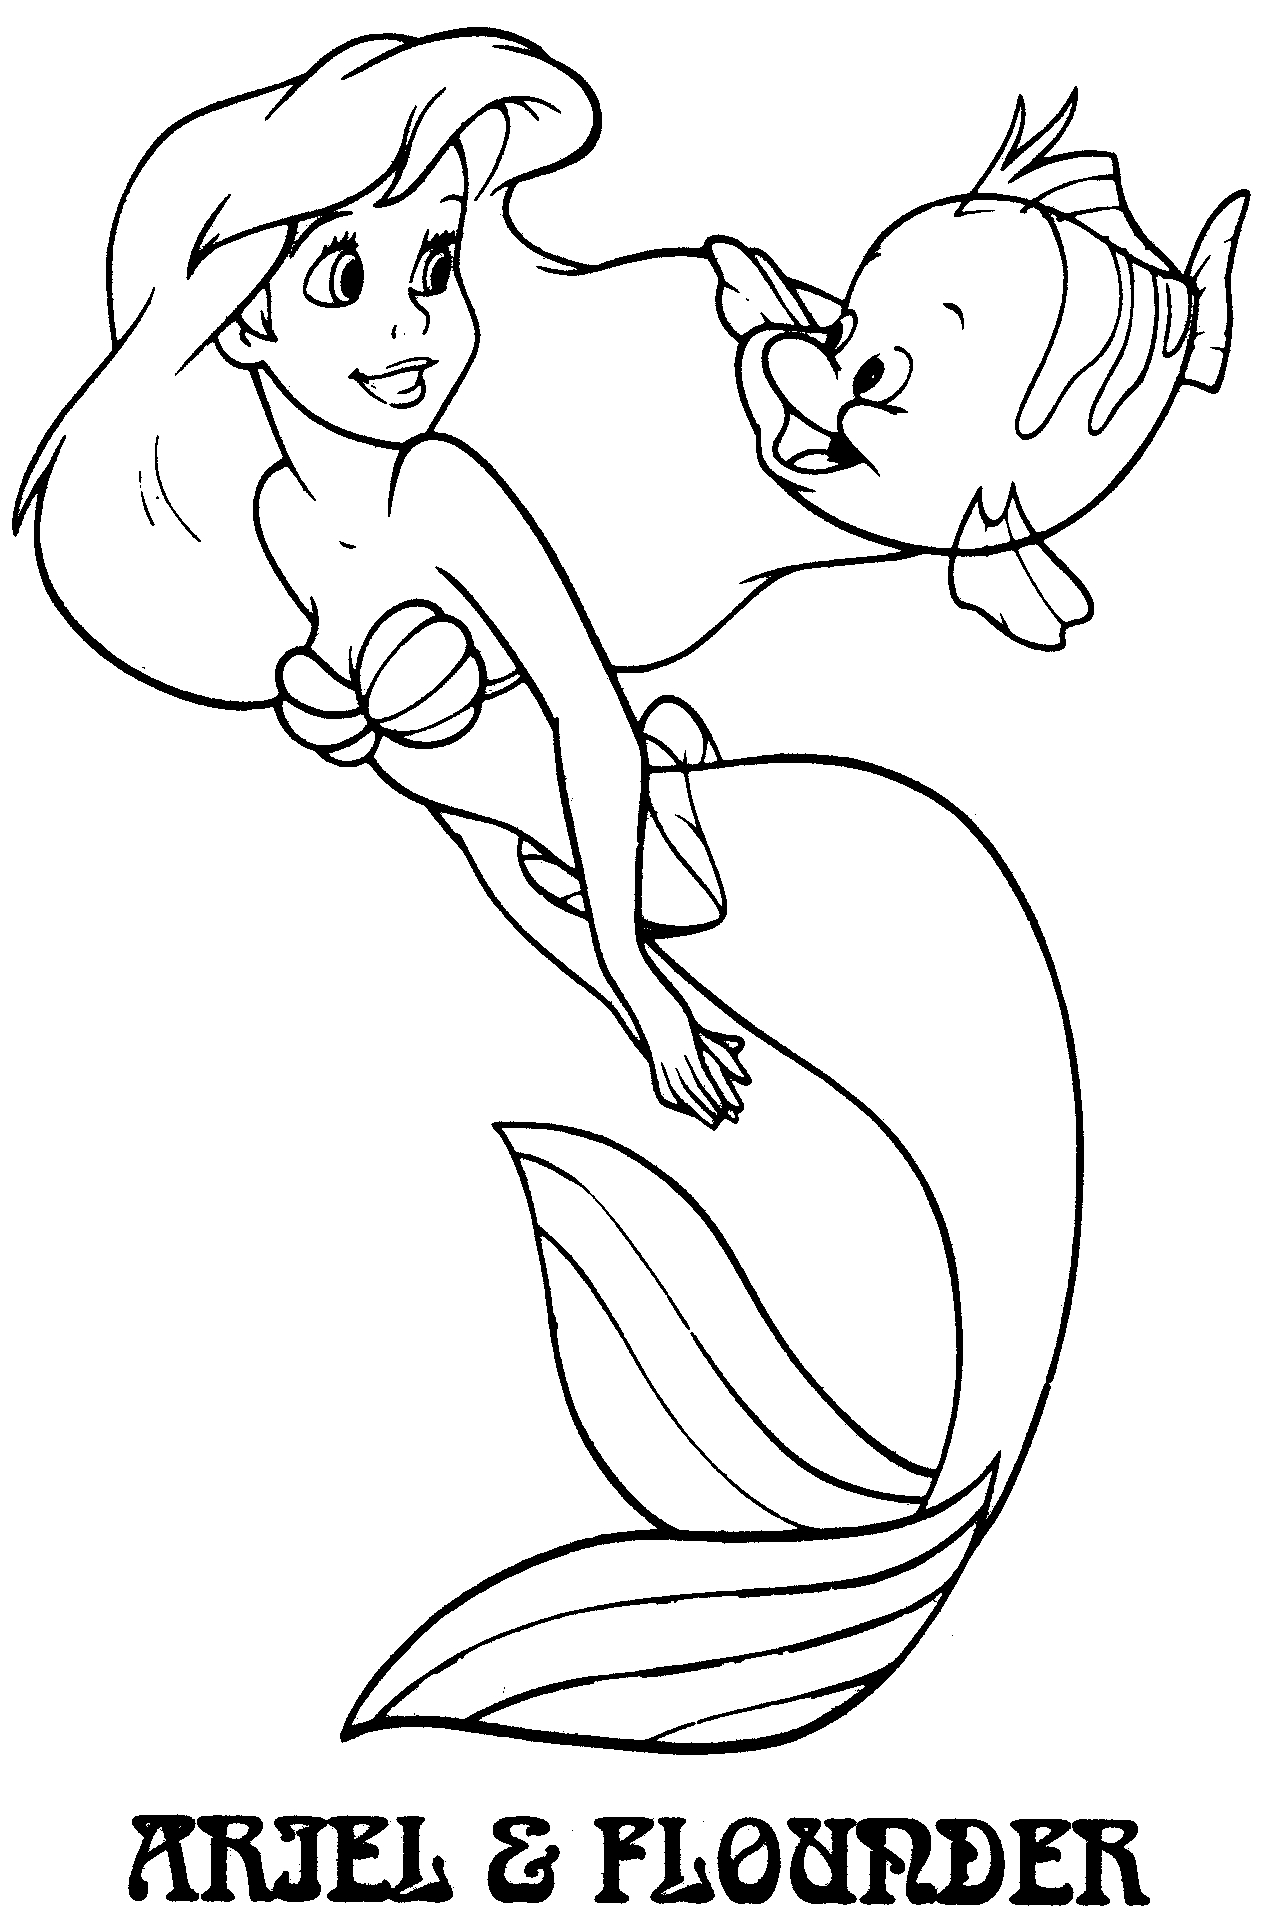 Free Ariel Coloring Pages Ariel And Flounder Coloring Pages For Kids And For Adults